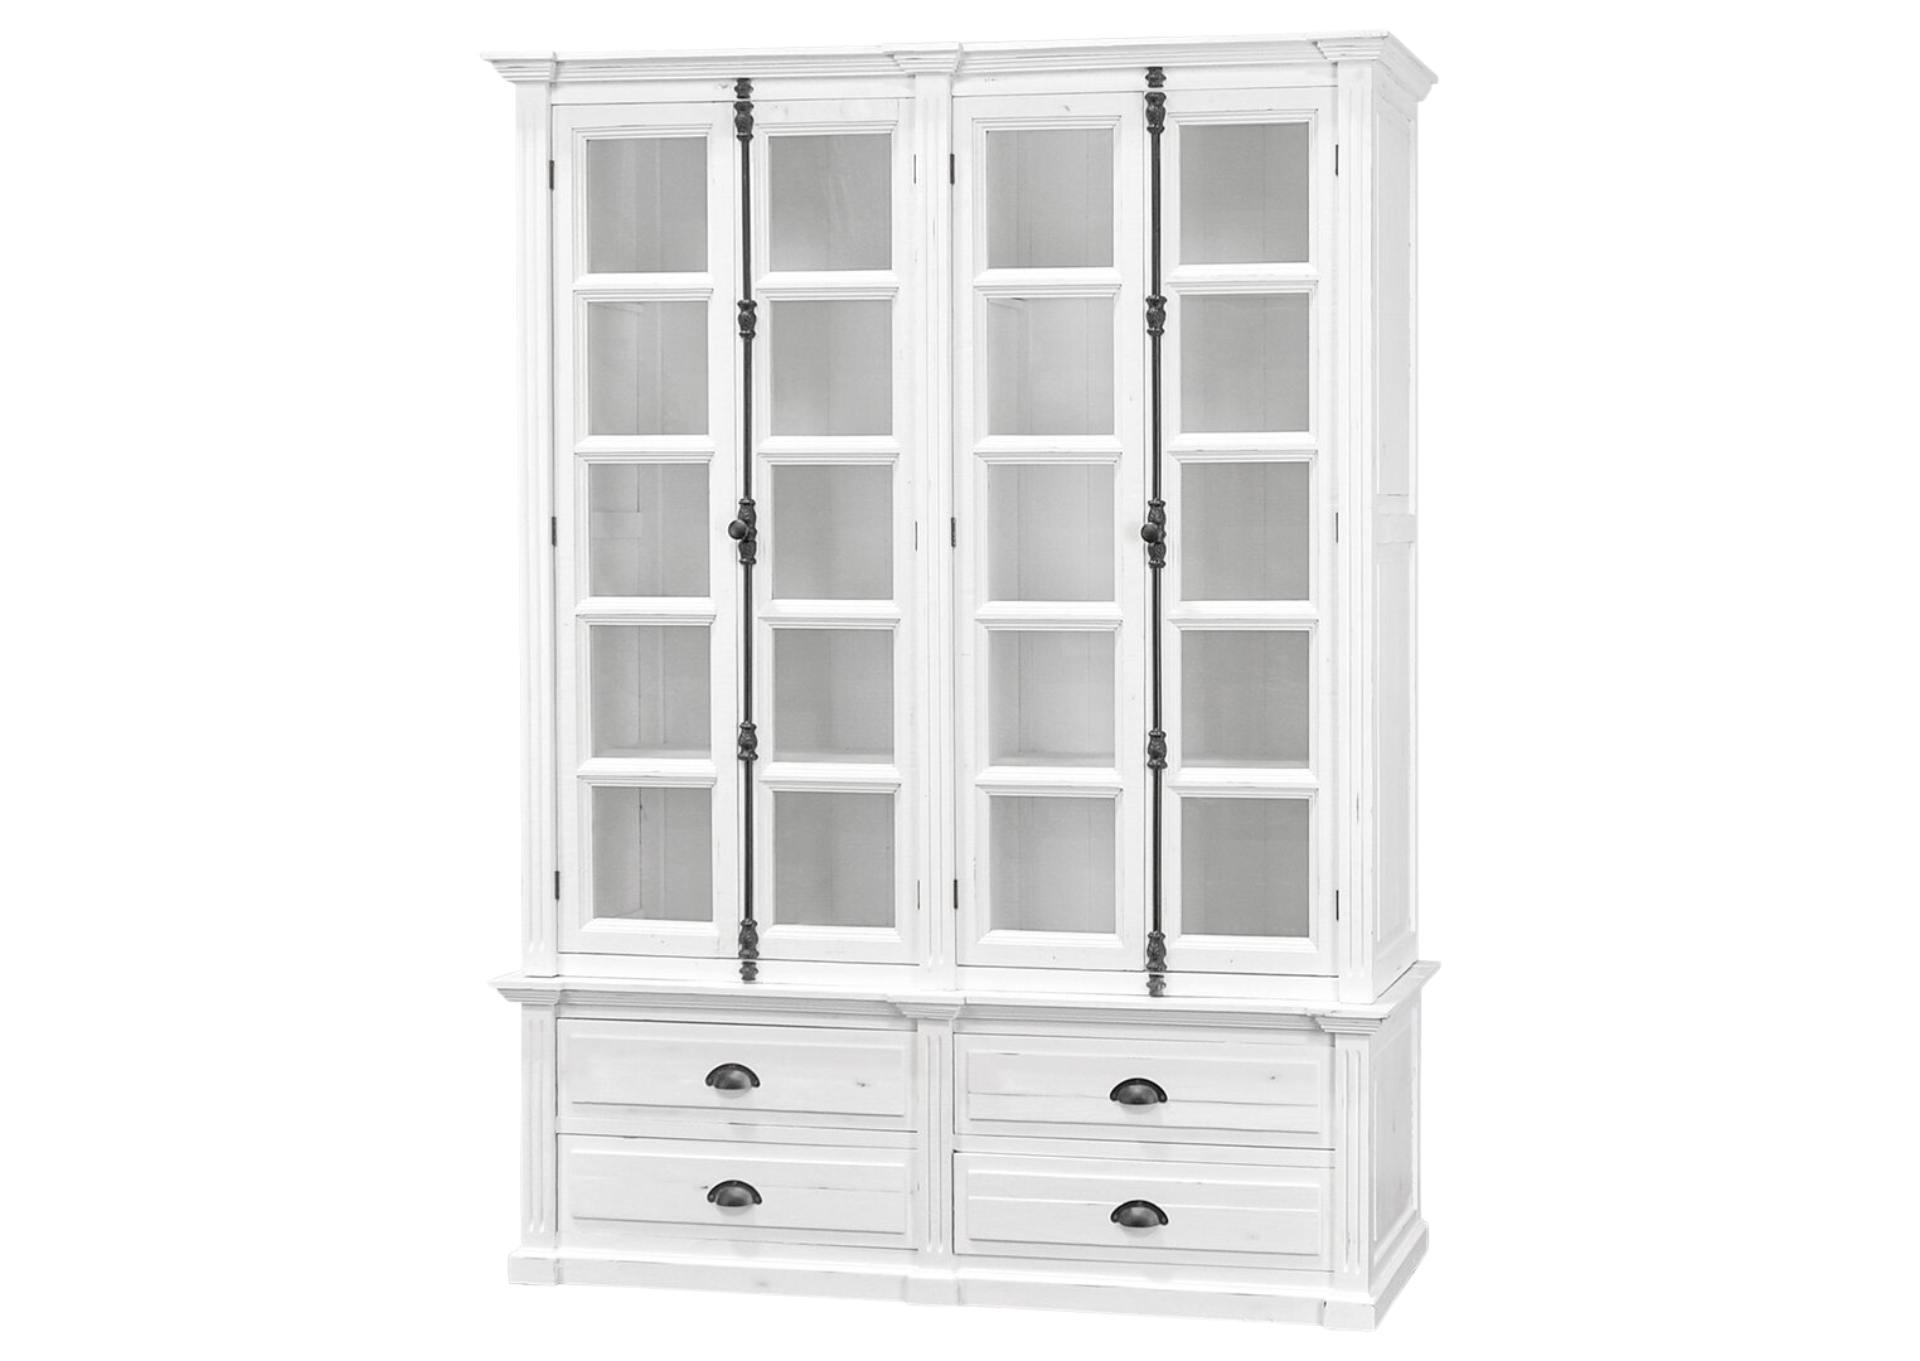 HARTFORD SANDED WHITE CURIO CABINET,ARDENT HOME